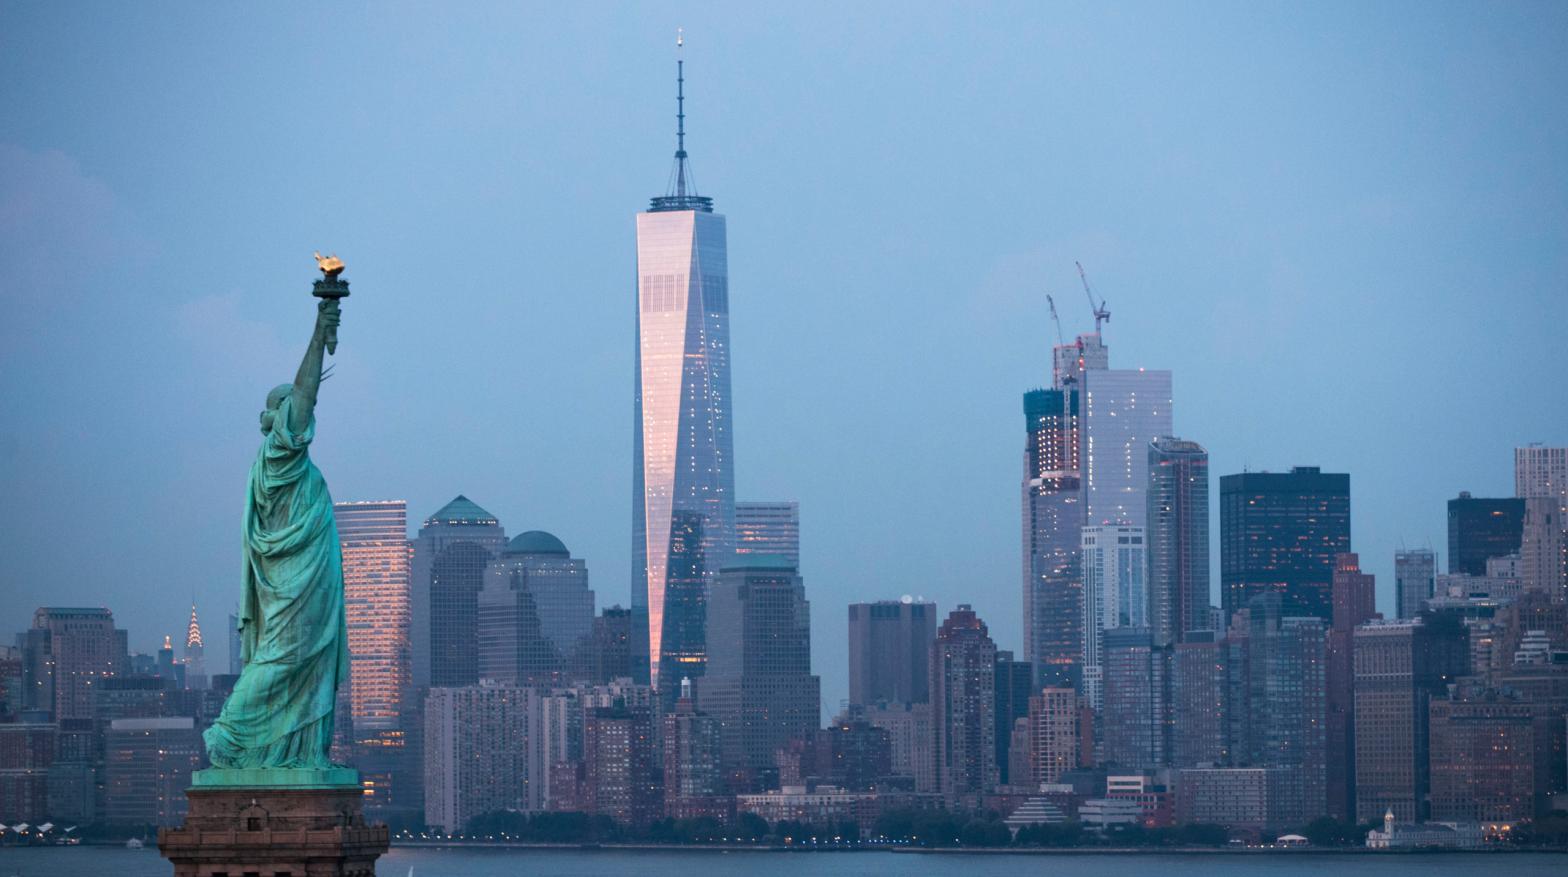 The Statue of Liberty stands in the foreground as Lower Manhattan is viewed at dusk. (Photo: Drew Angerer, Getty Images)